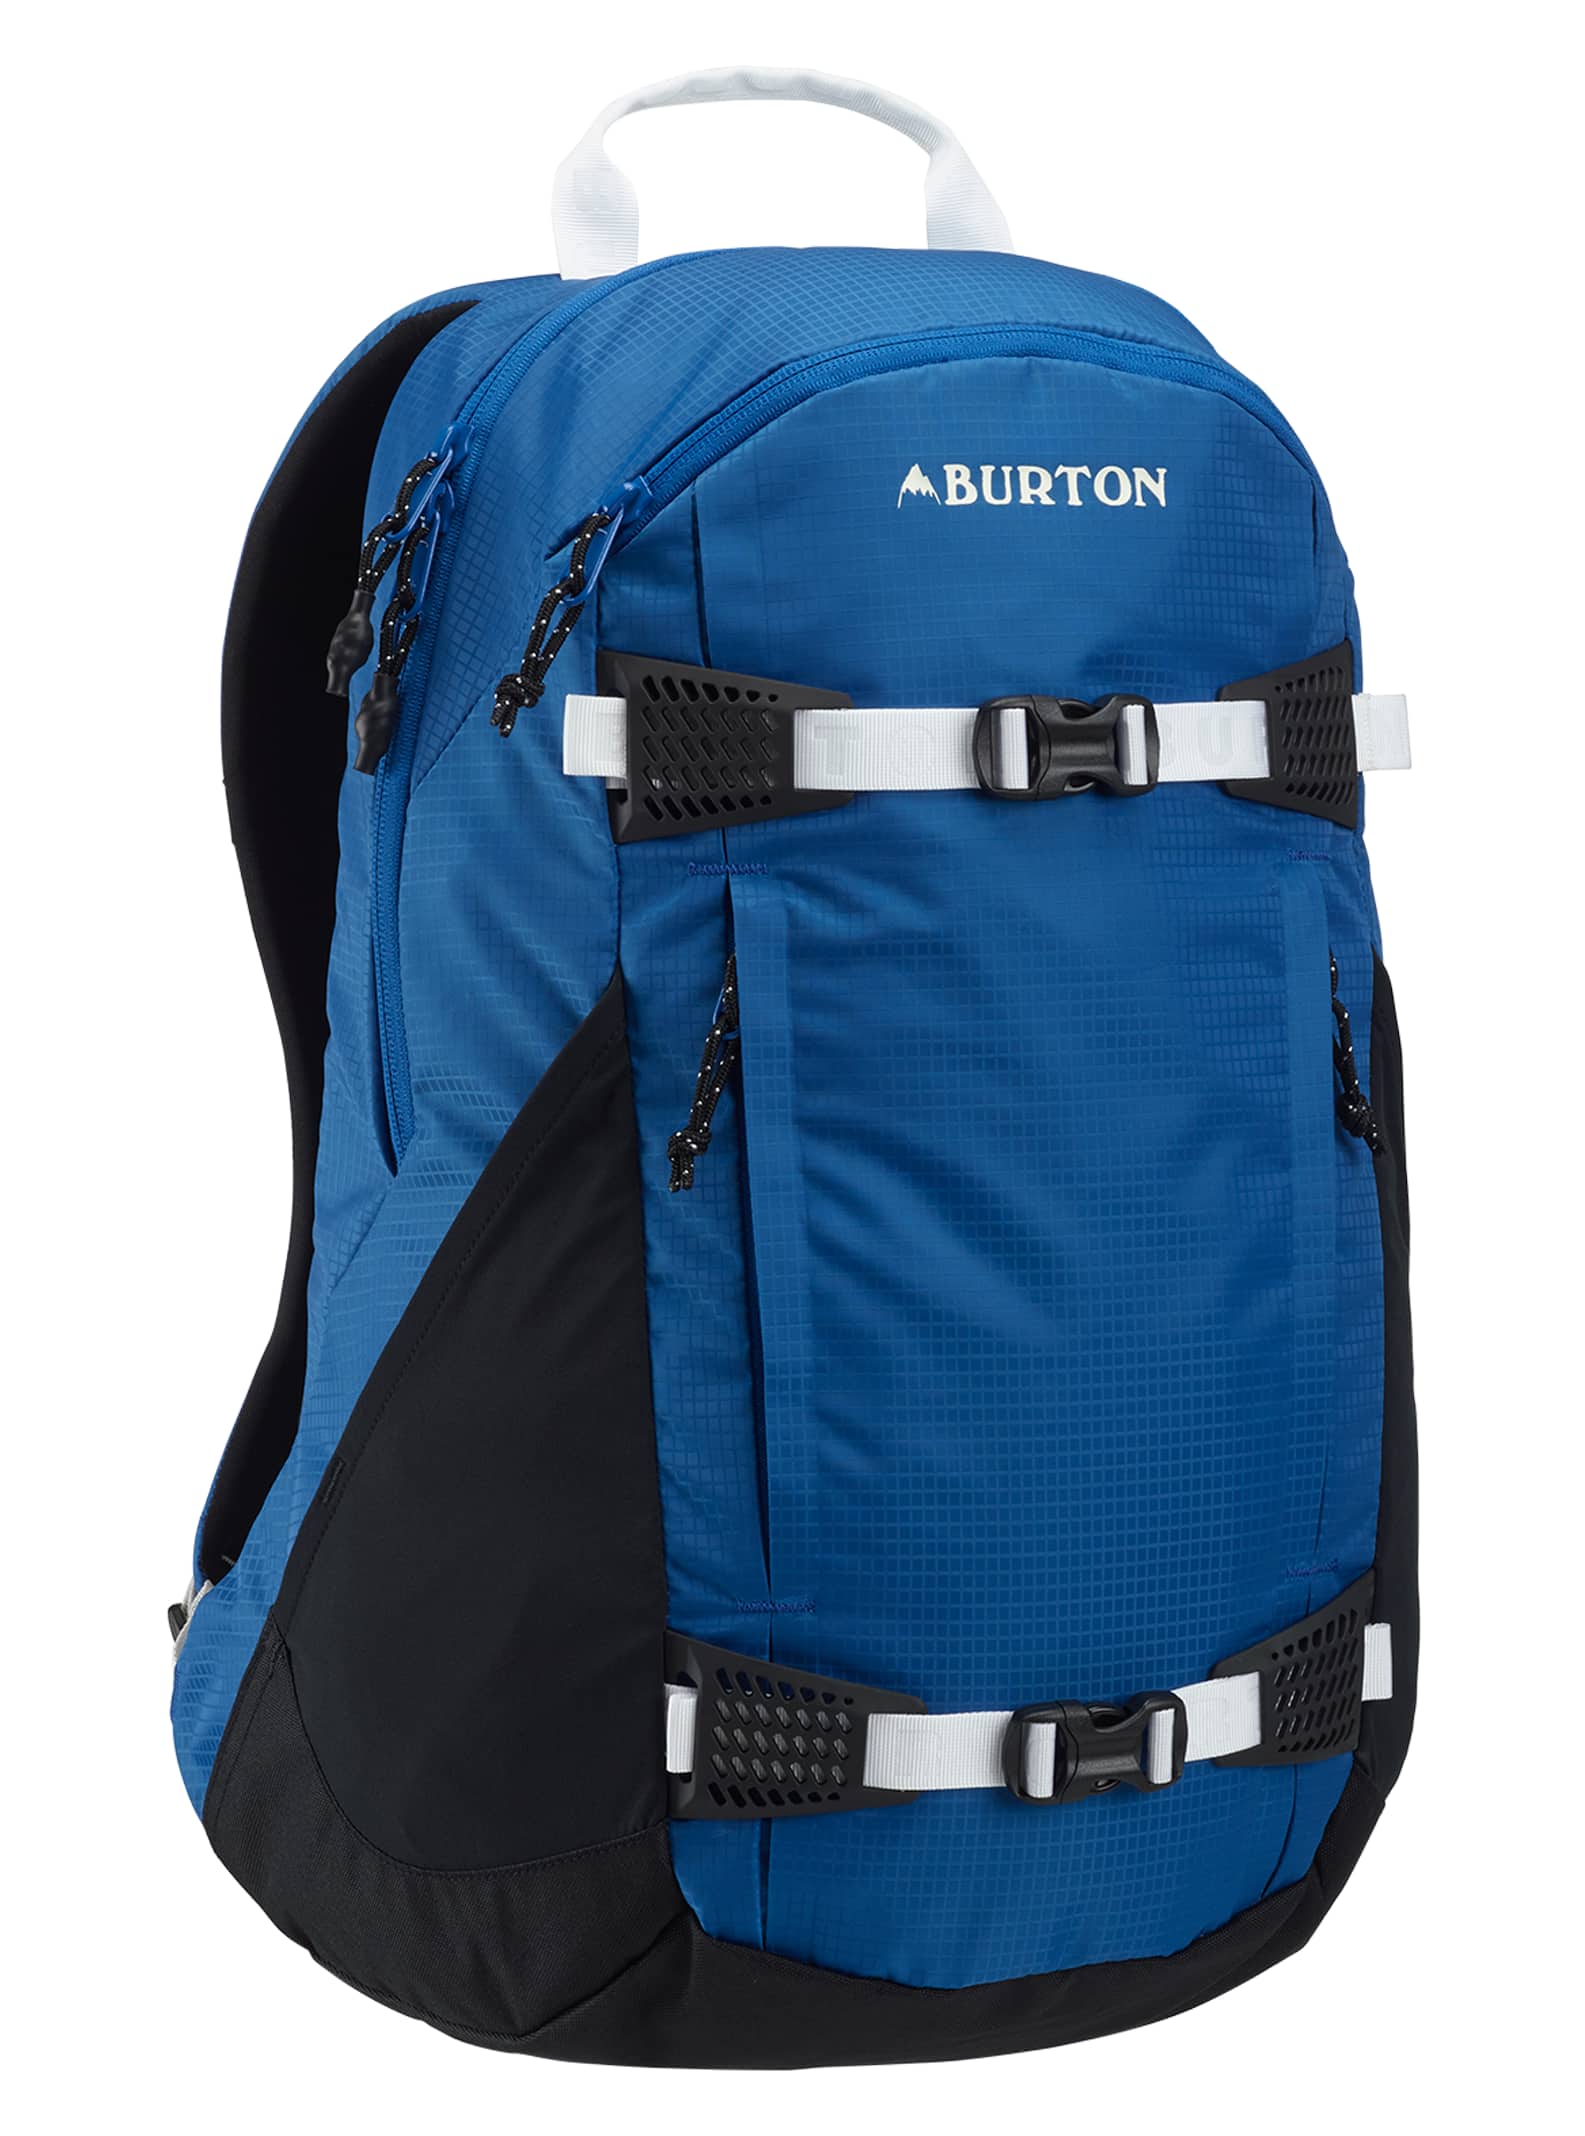 Burton Day Hiker 25L Backpack, Classic Blue Ripstop